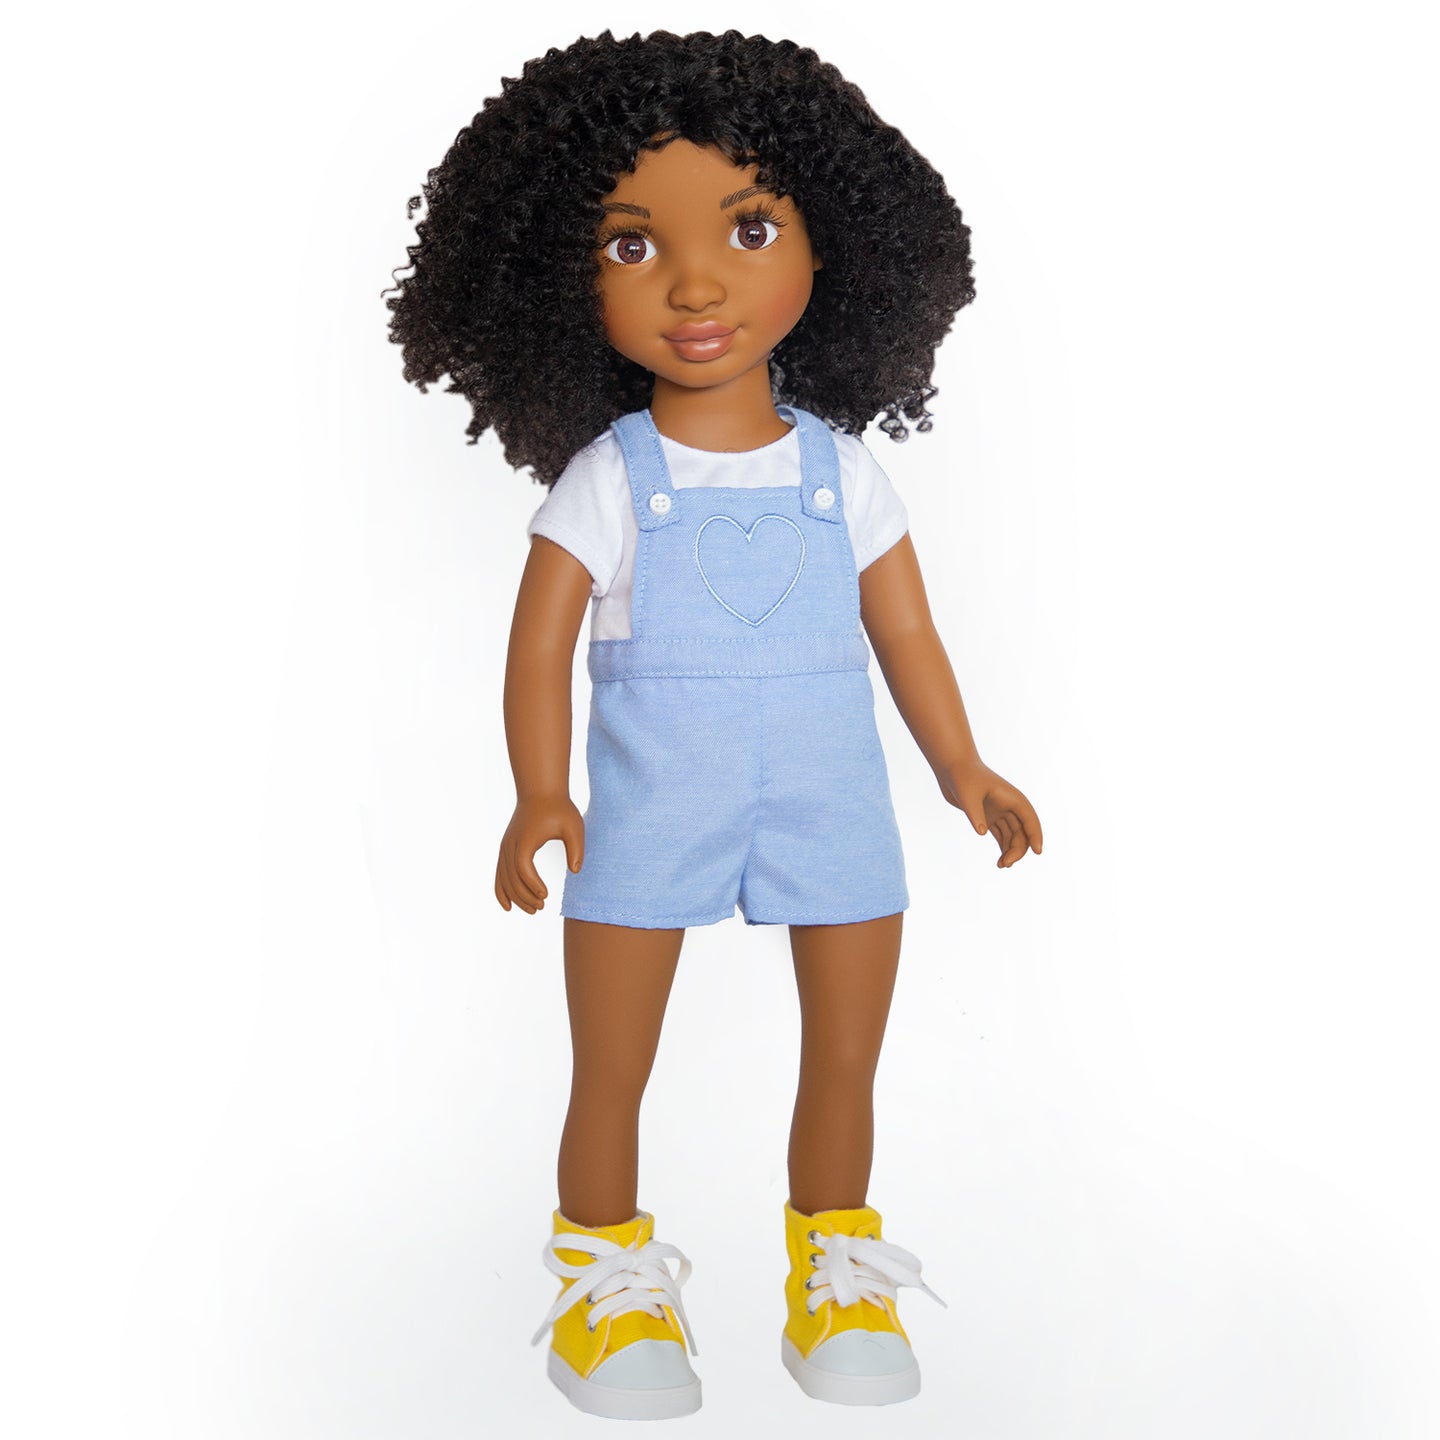 Healthy Roots Doll: Zoe